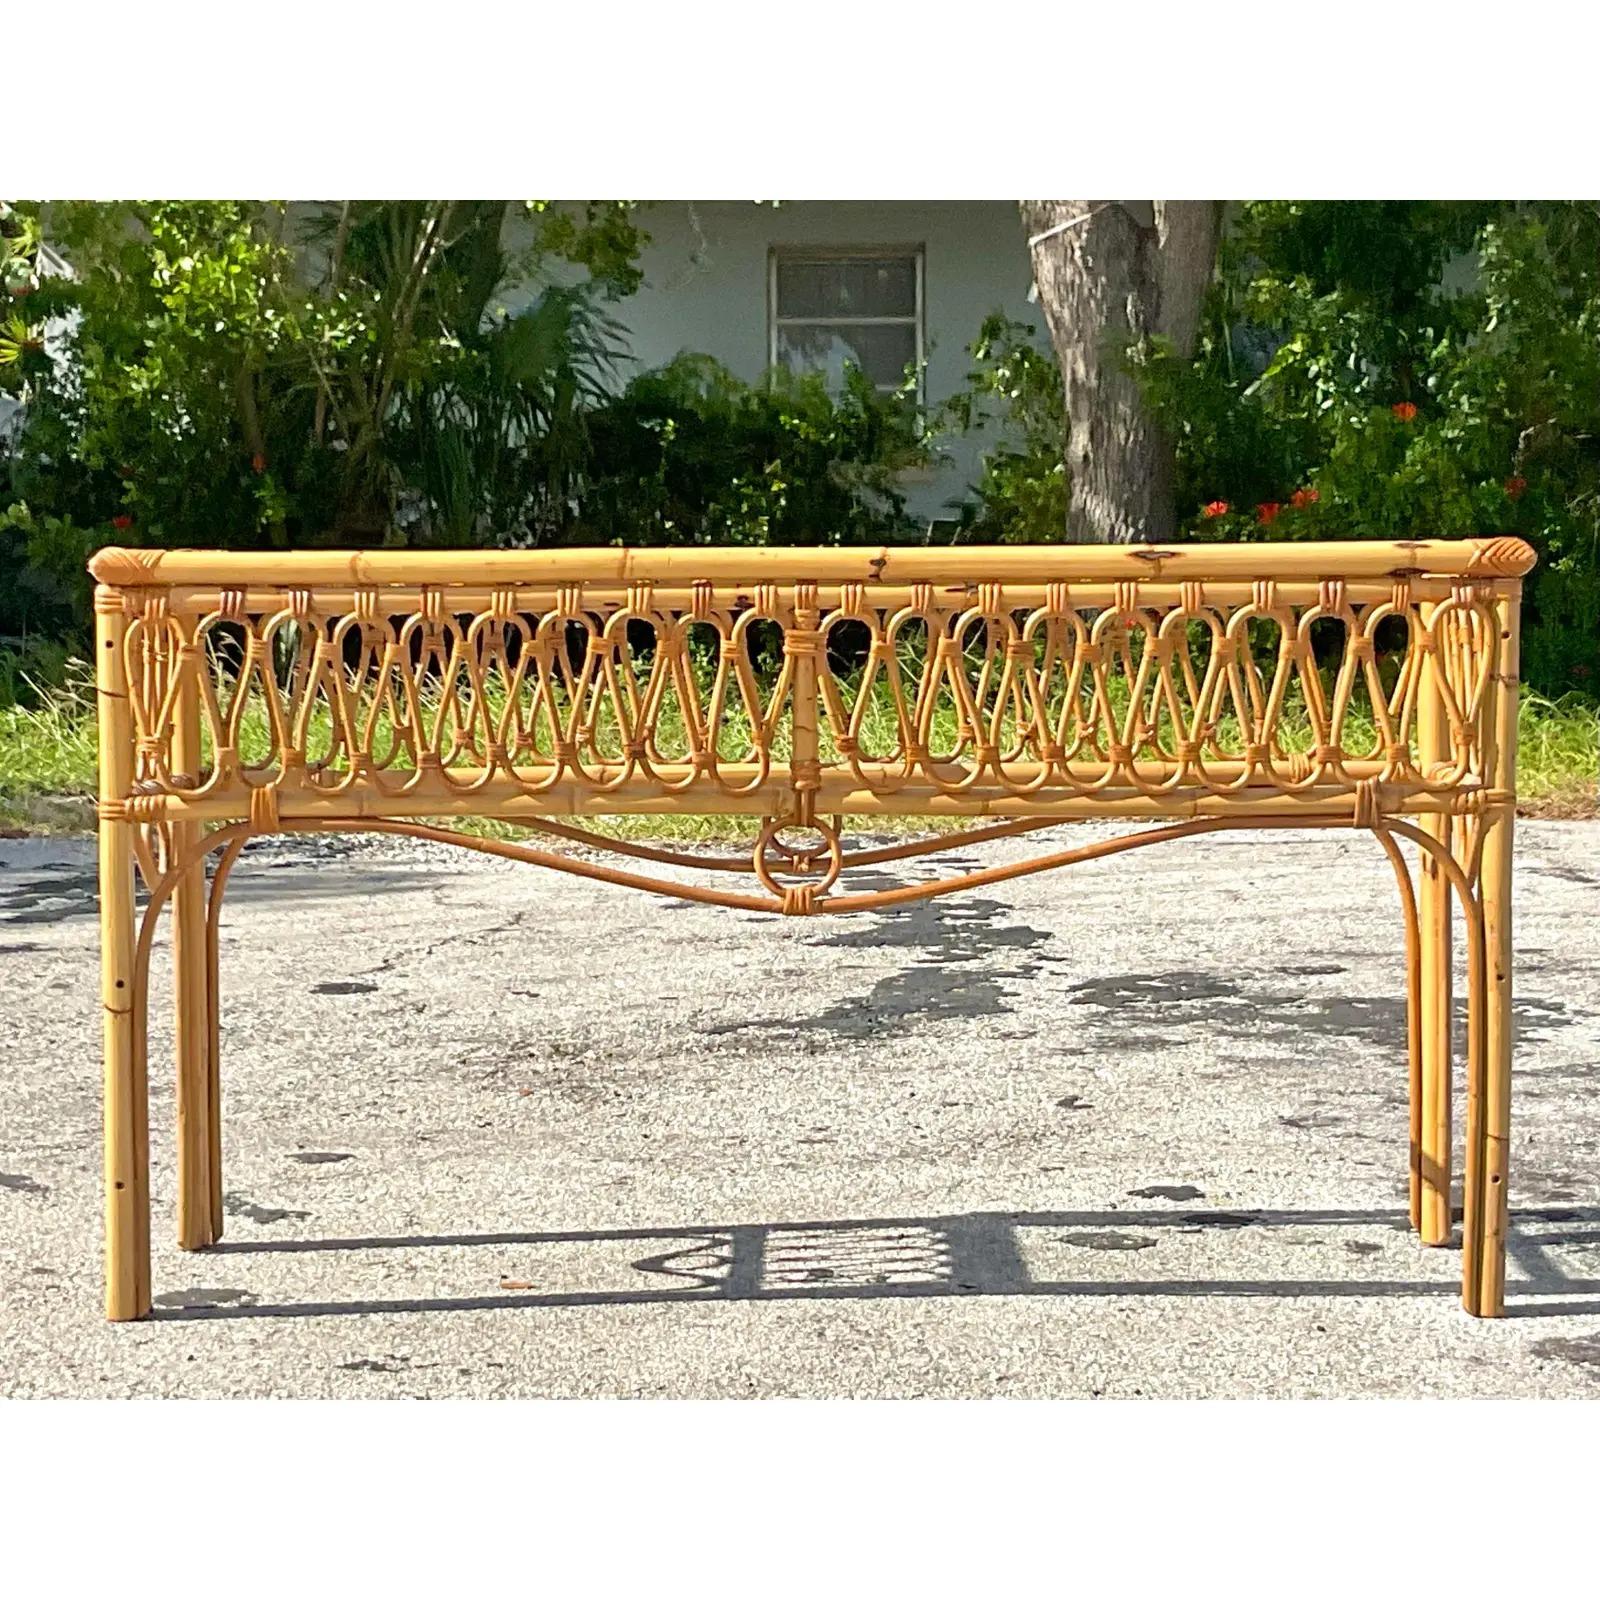 A fabulous vintage Coastal console table. A chic scrolling bent rattan border with an inset glass top. Perfect in its simplicity. Made in Italy. Acquired from a Palm Beach estate.